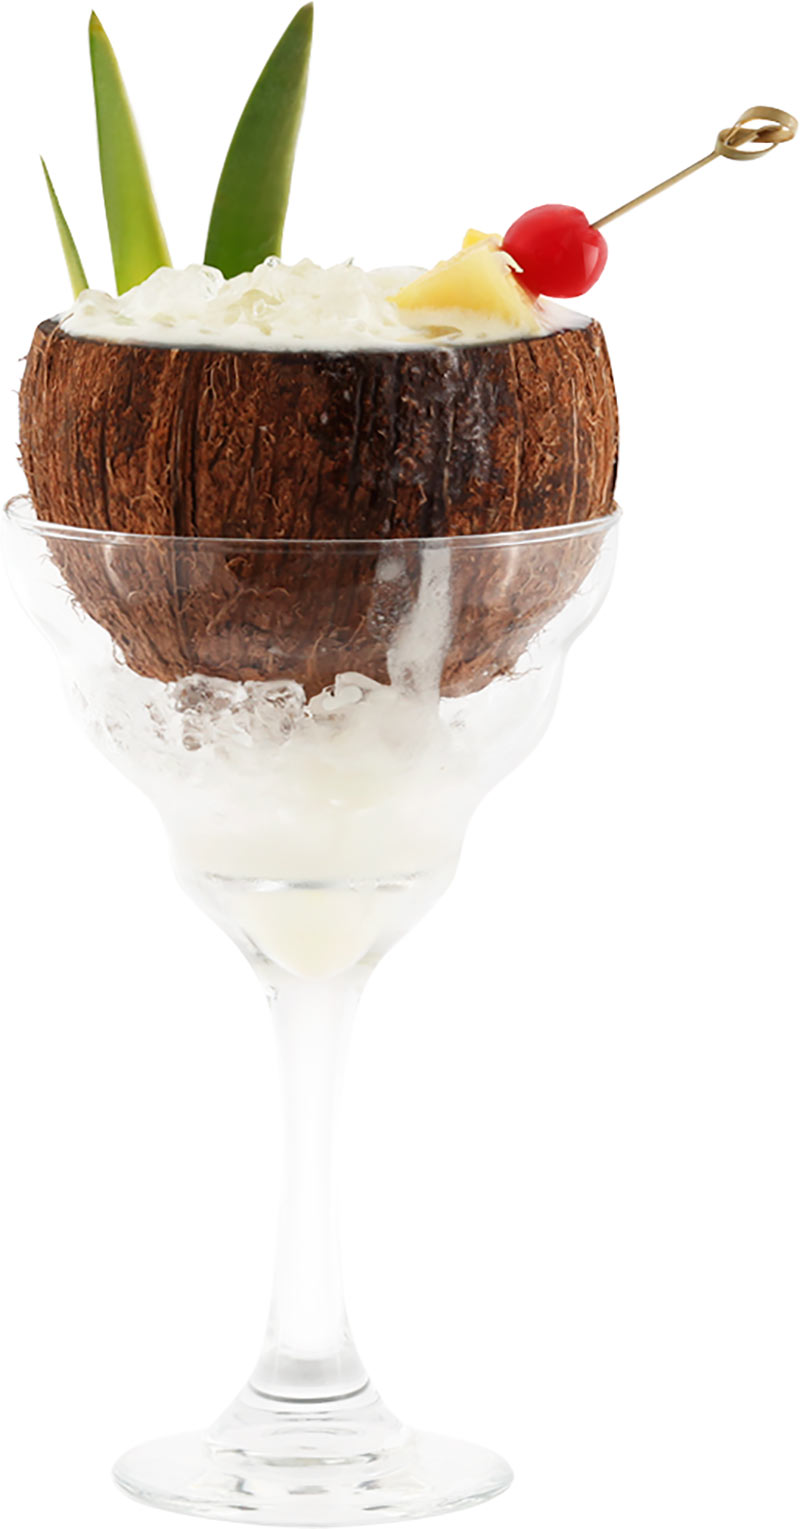 How to Make the Piña Colada in a Coconut